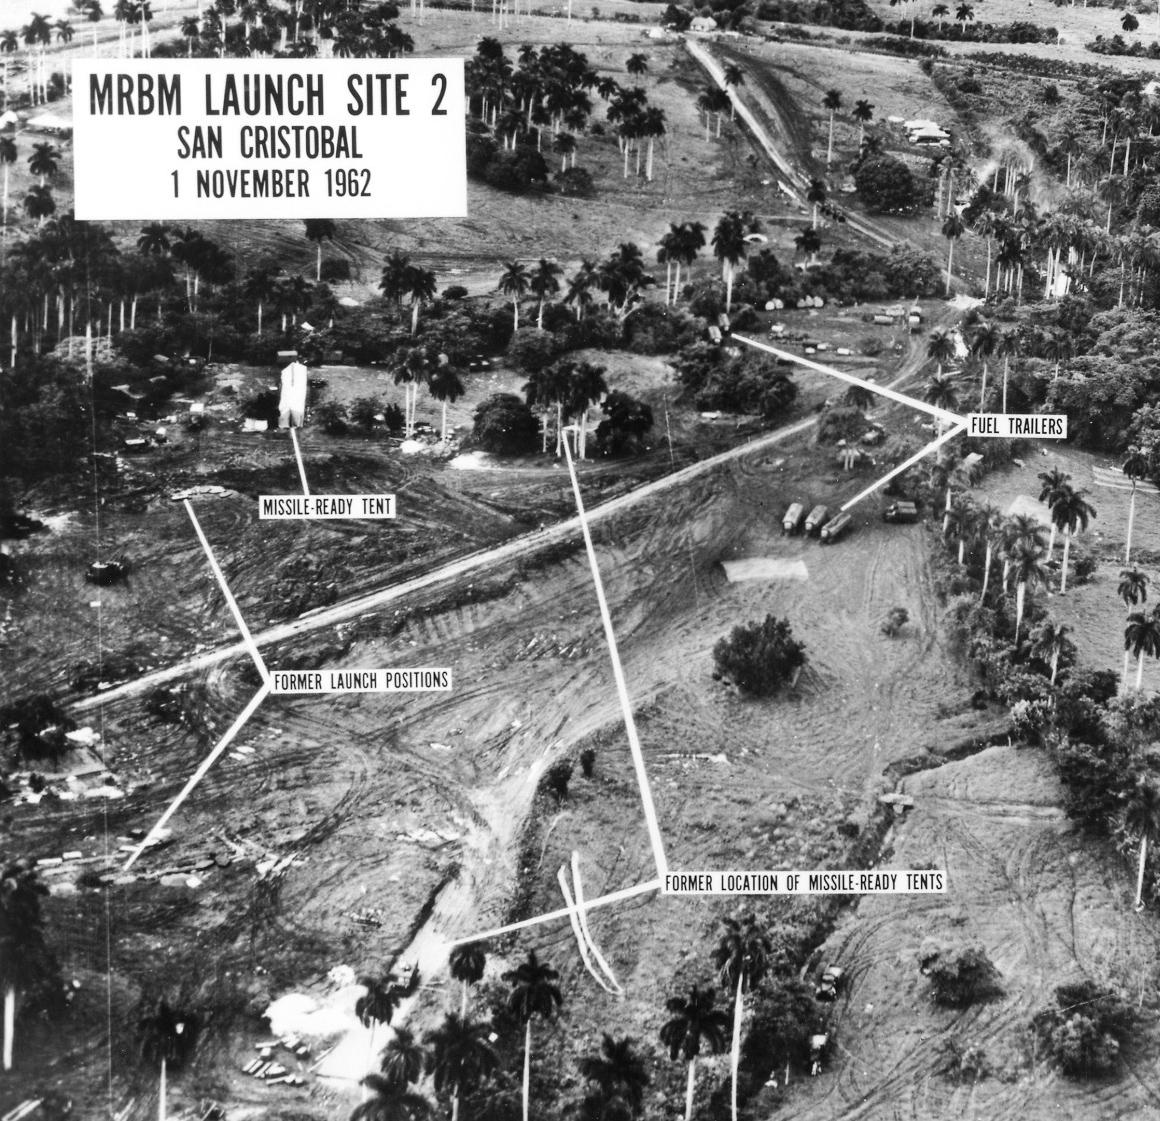 Photographic evidence of Soviet missiles on Cuban territory was incontrovertible proof that there was a severe risk of nuclear war between the United States and the USSR. (Public Domain)